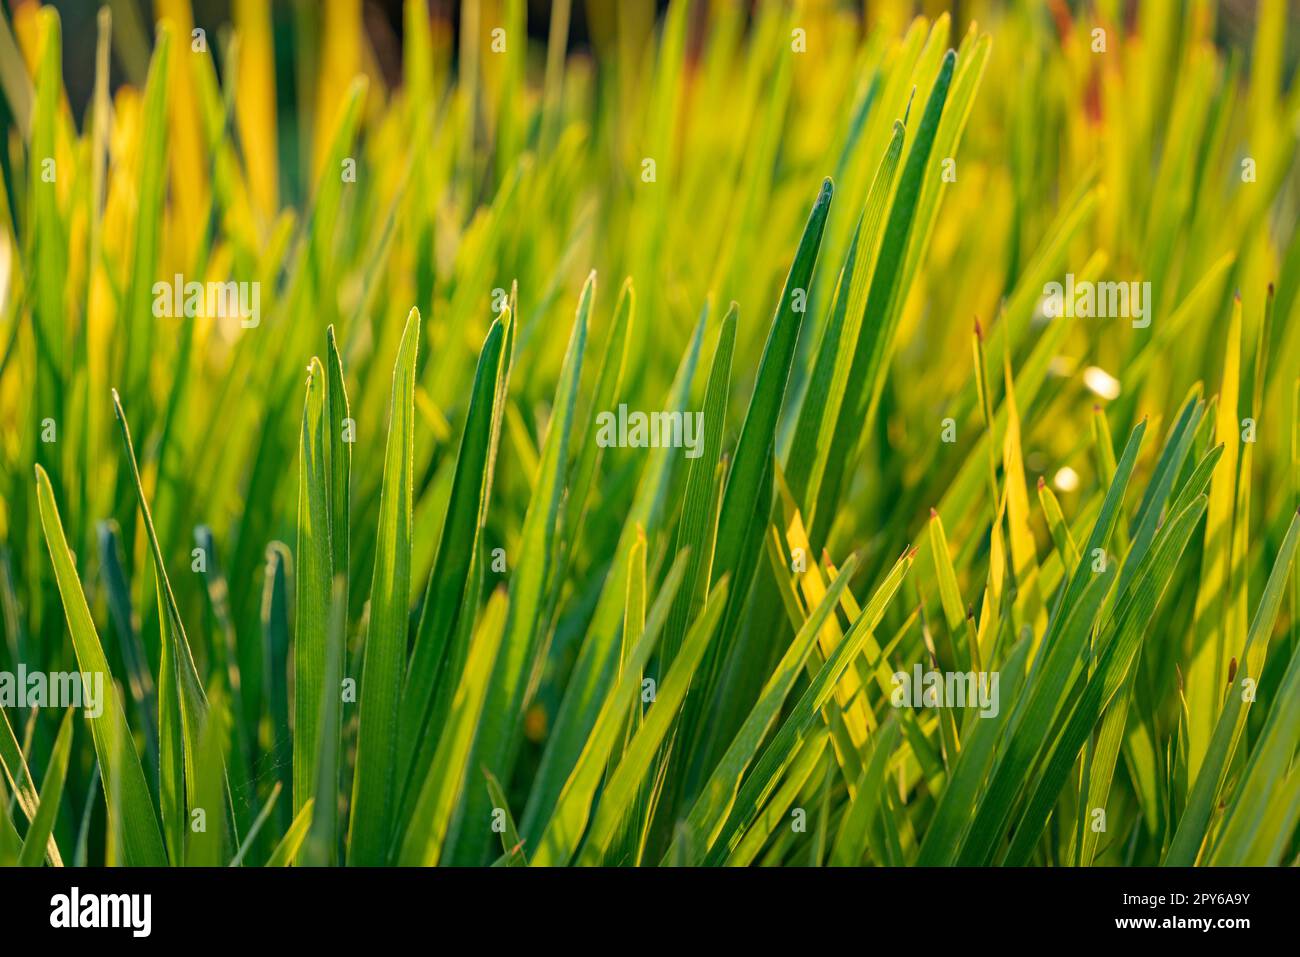 Sunny grass leaves Stock Photo